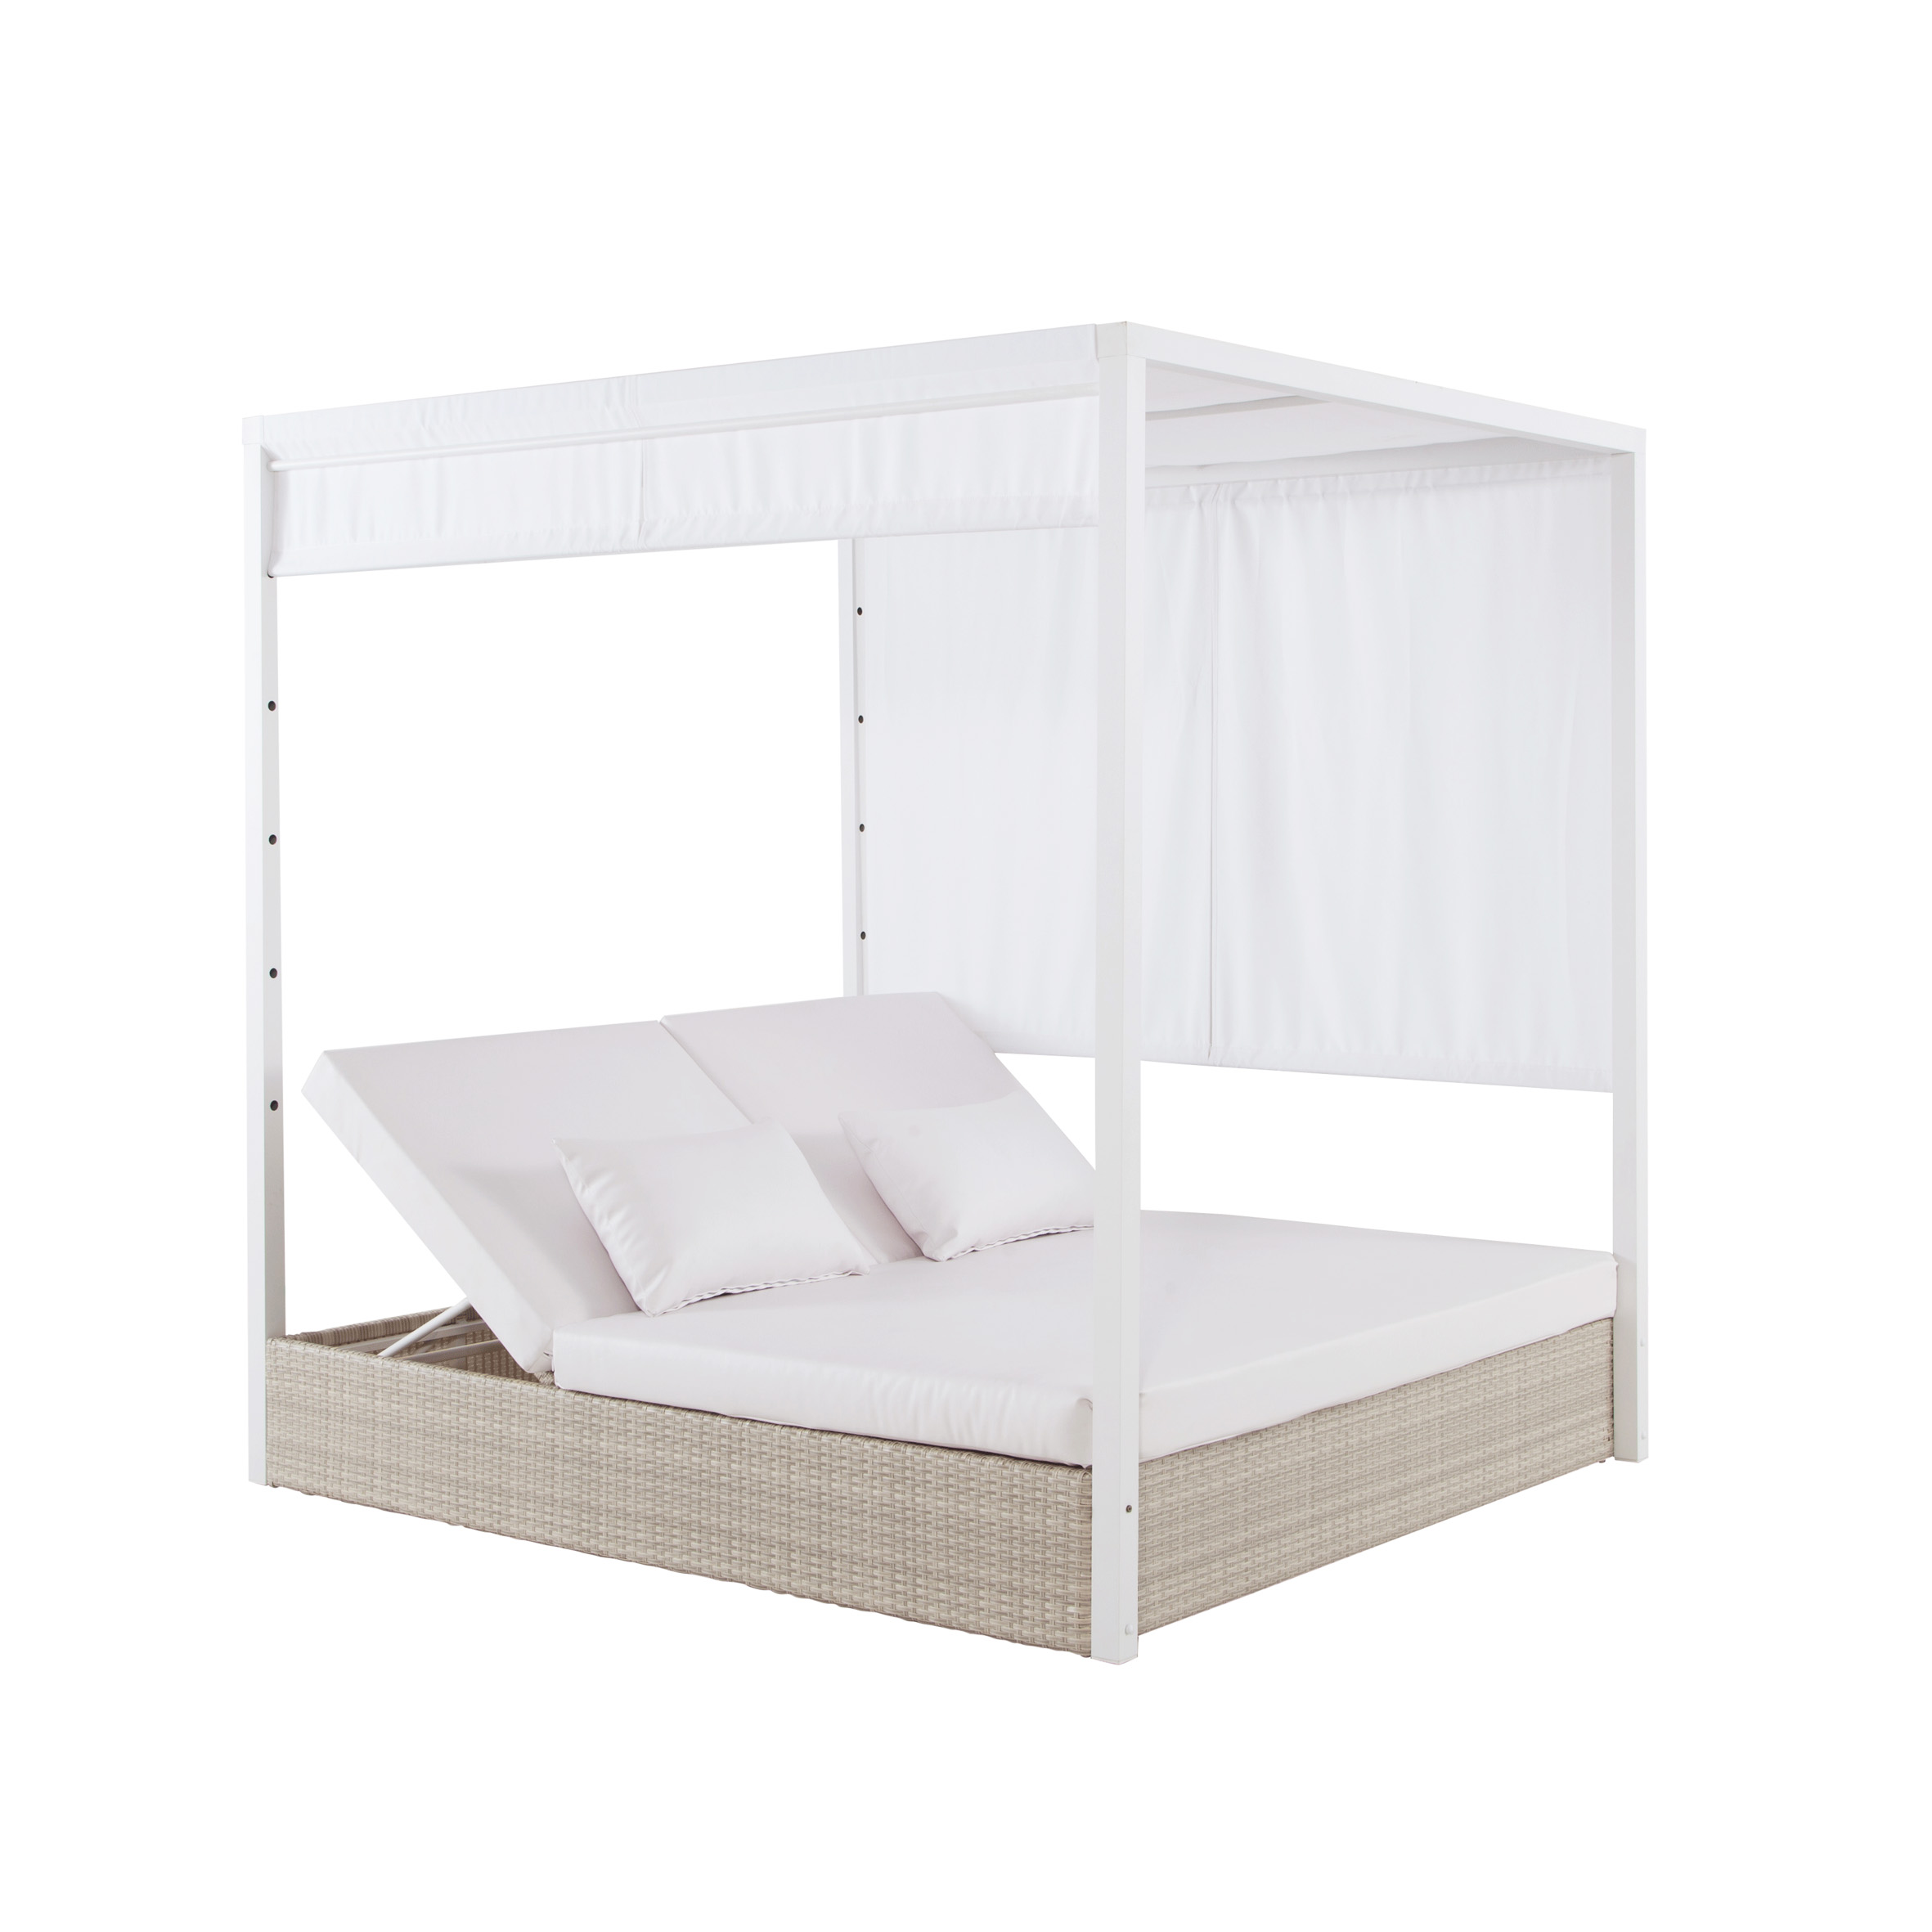 Angel rattan daybed with curtain Featured Image